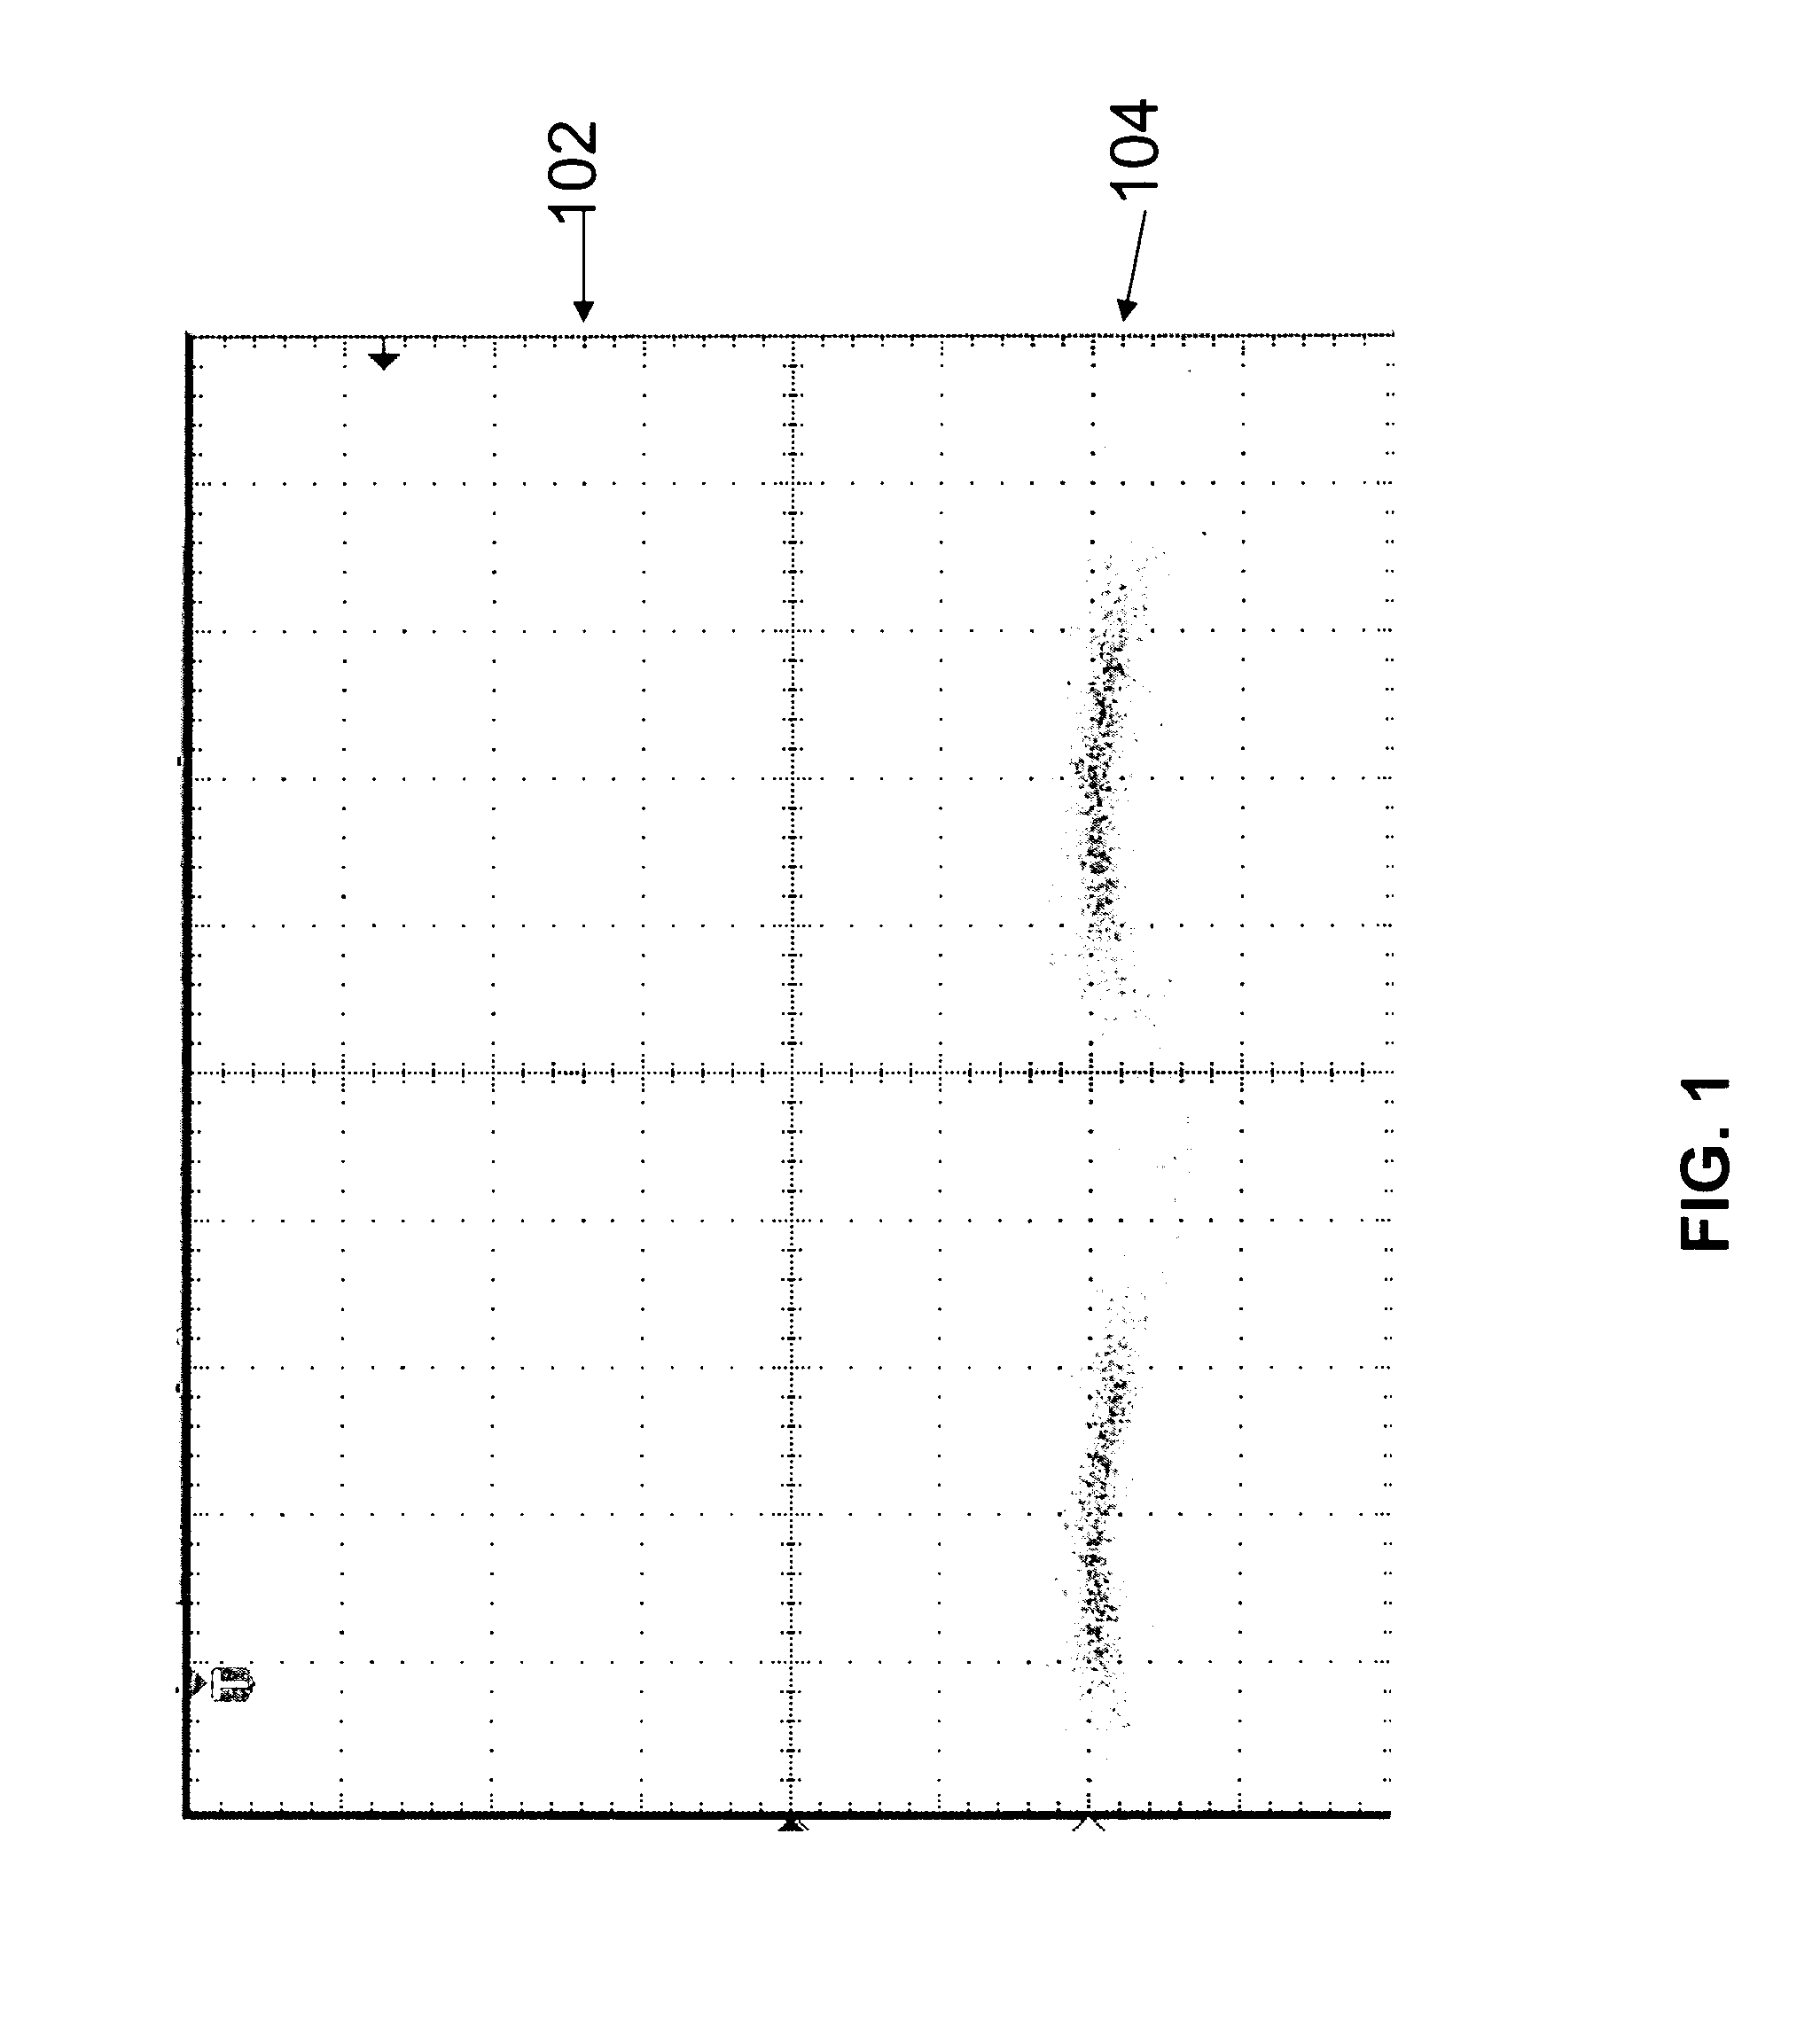 Spread spectrum modulation of a clock signal for reduction of electromagnetic interference